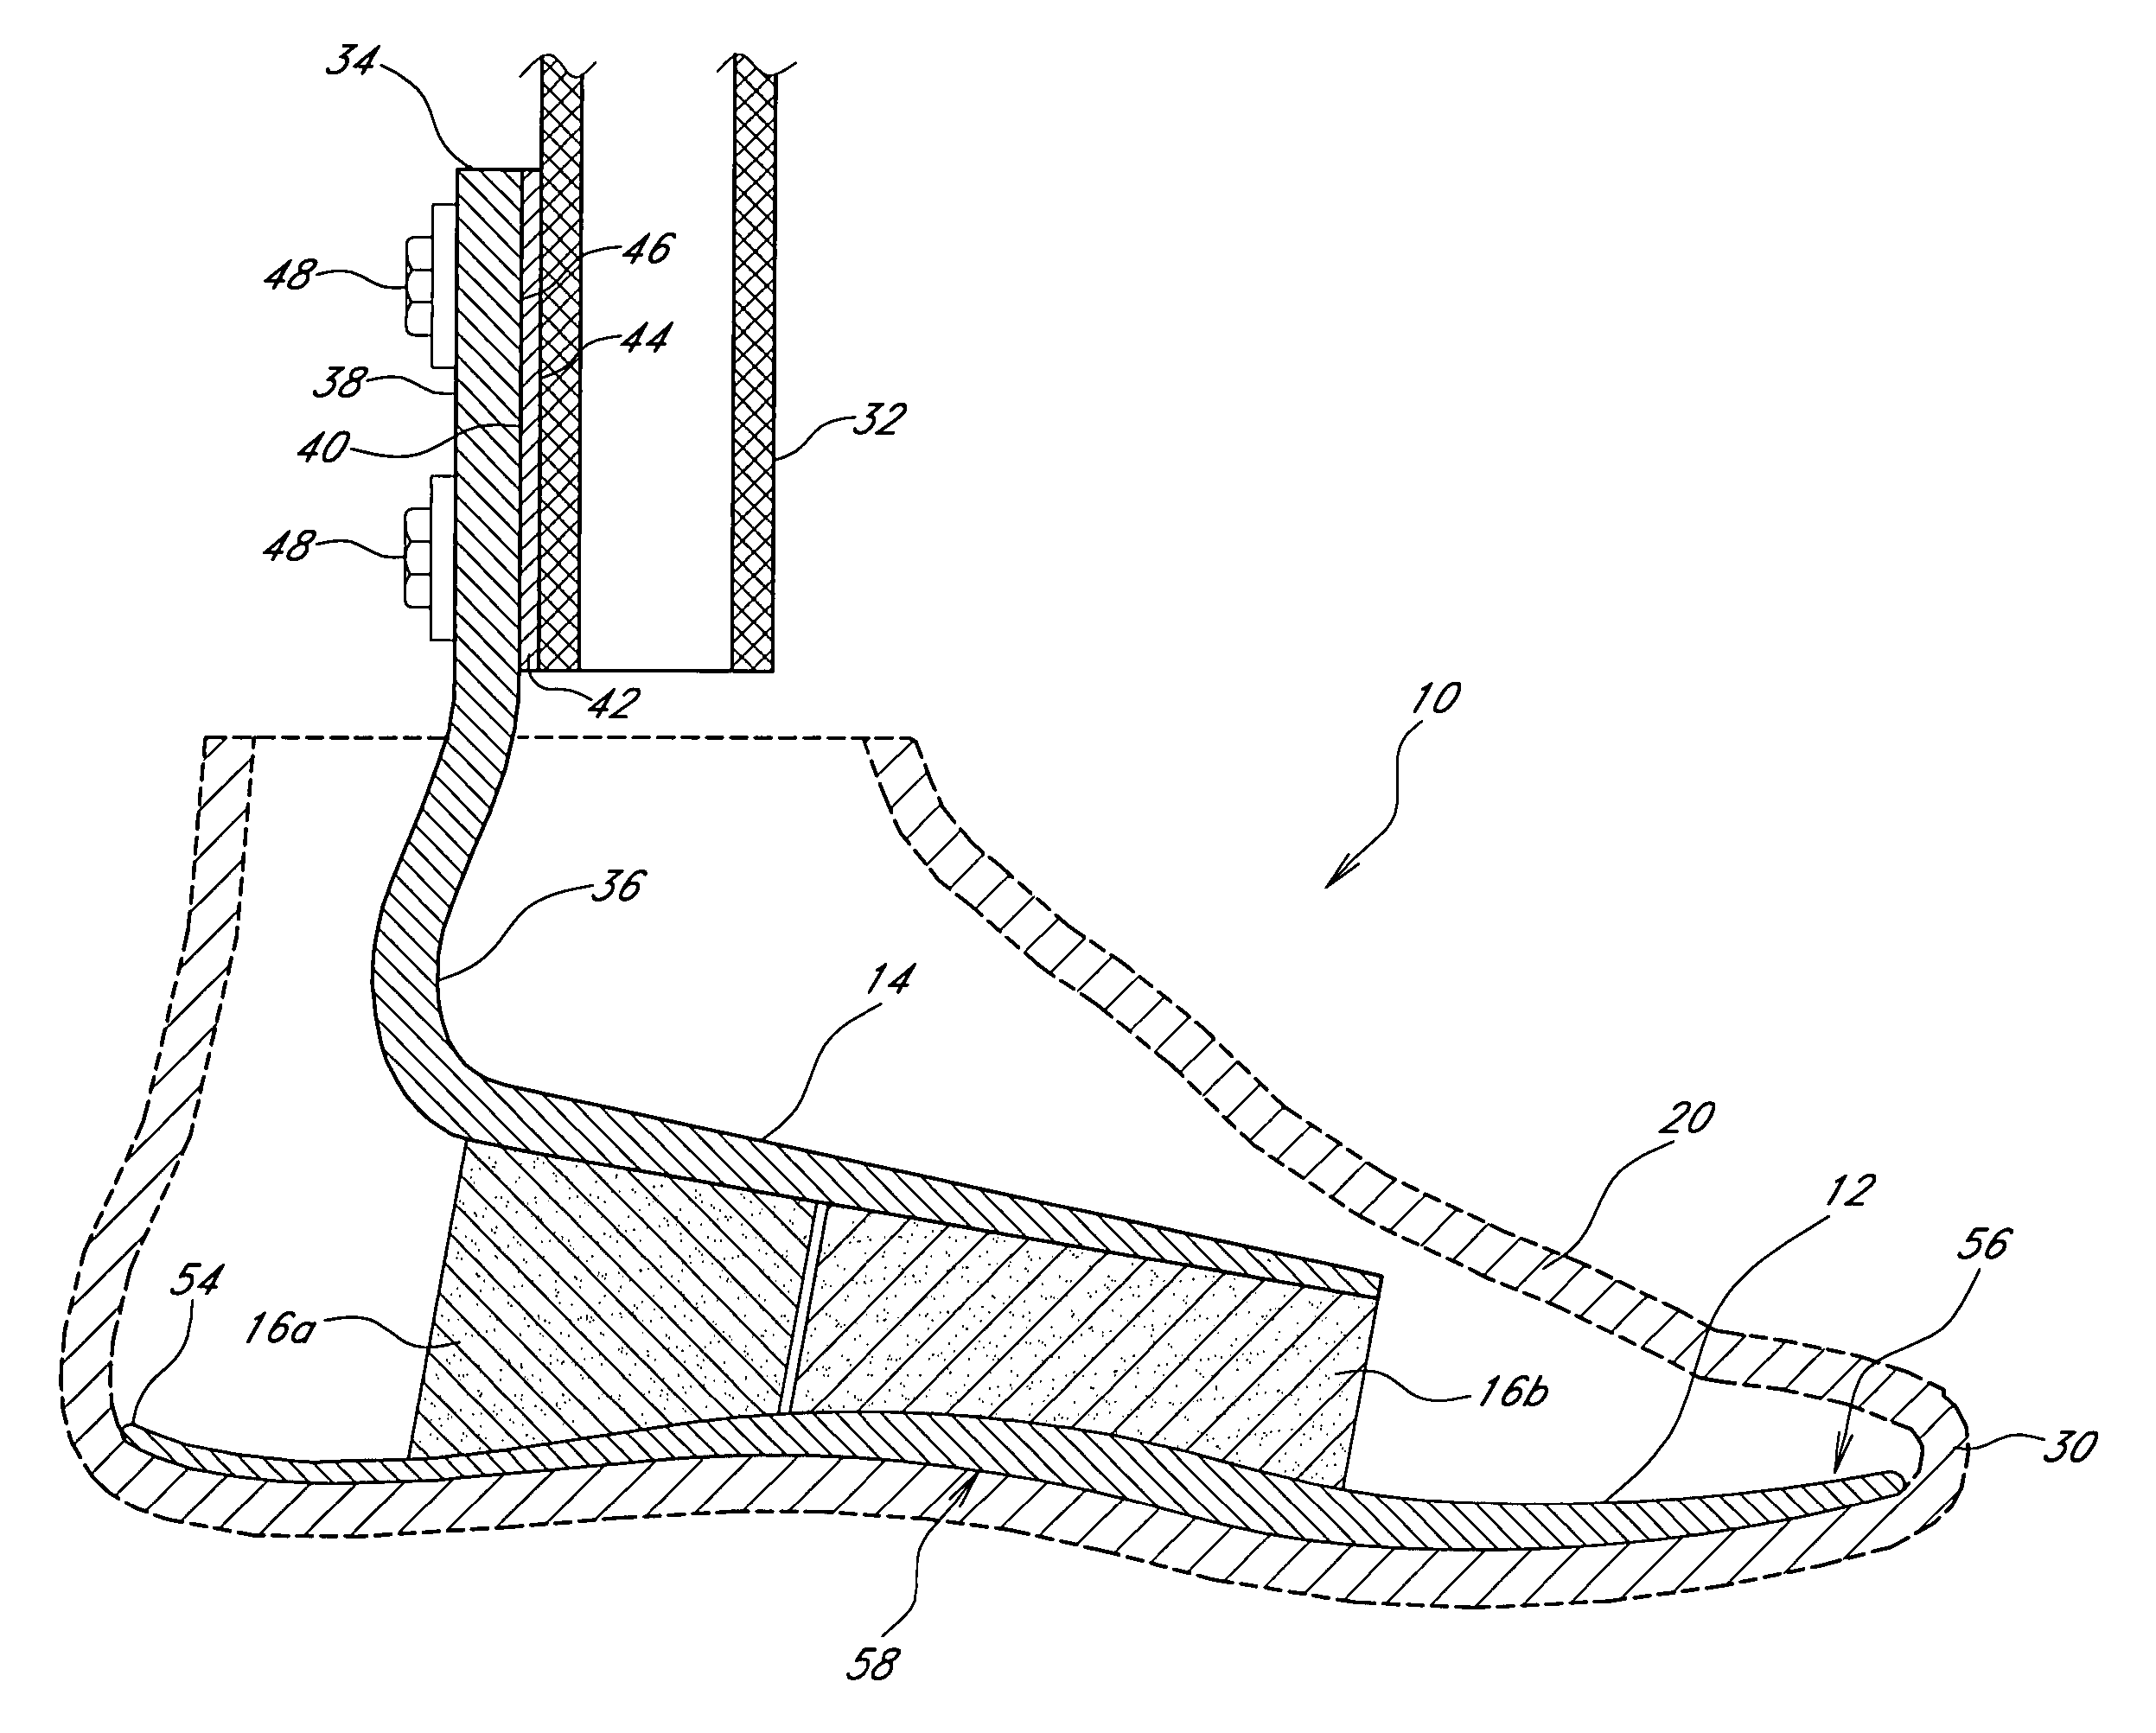 Foot prosthesis having cushioned ankle